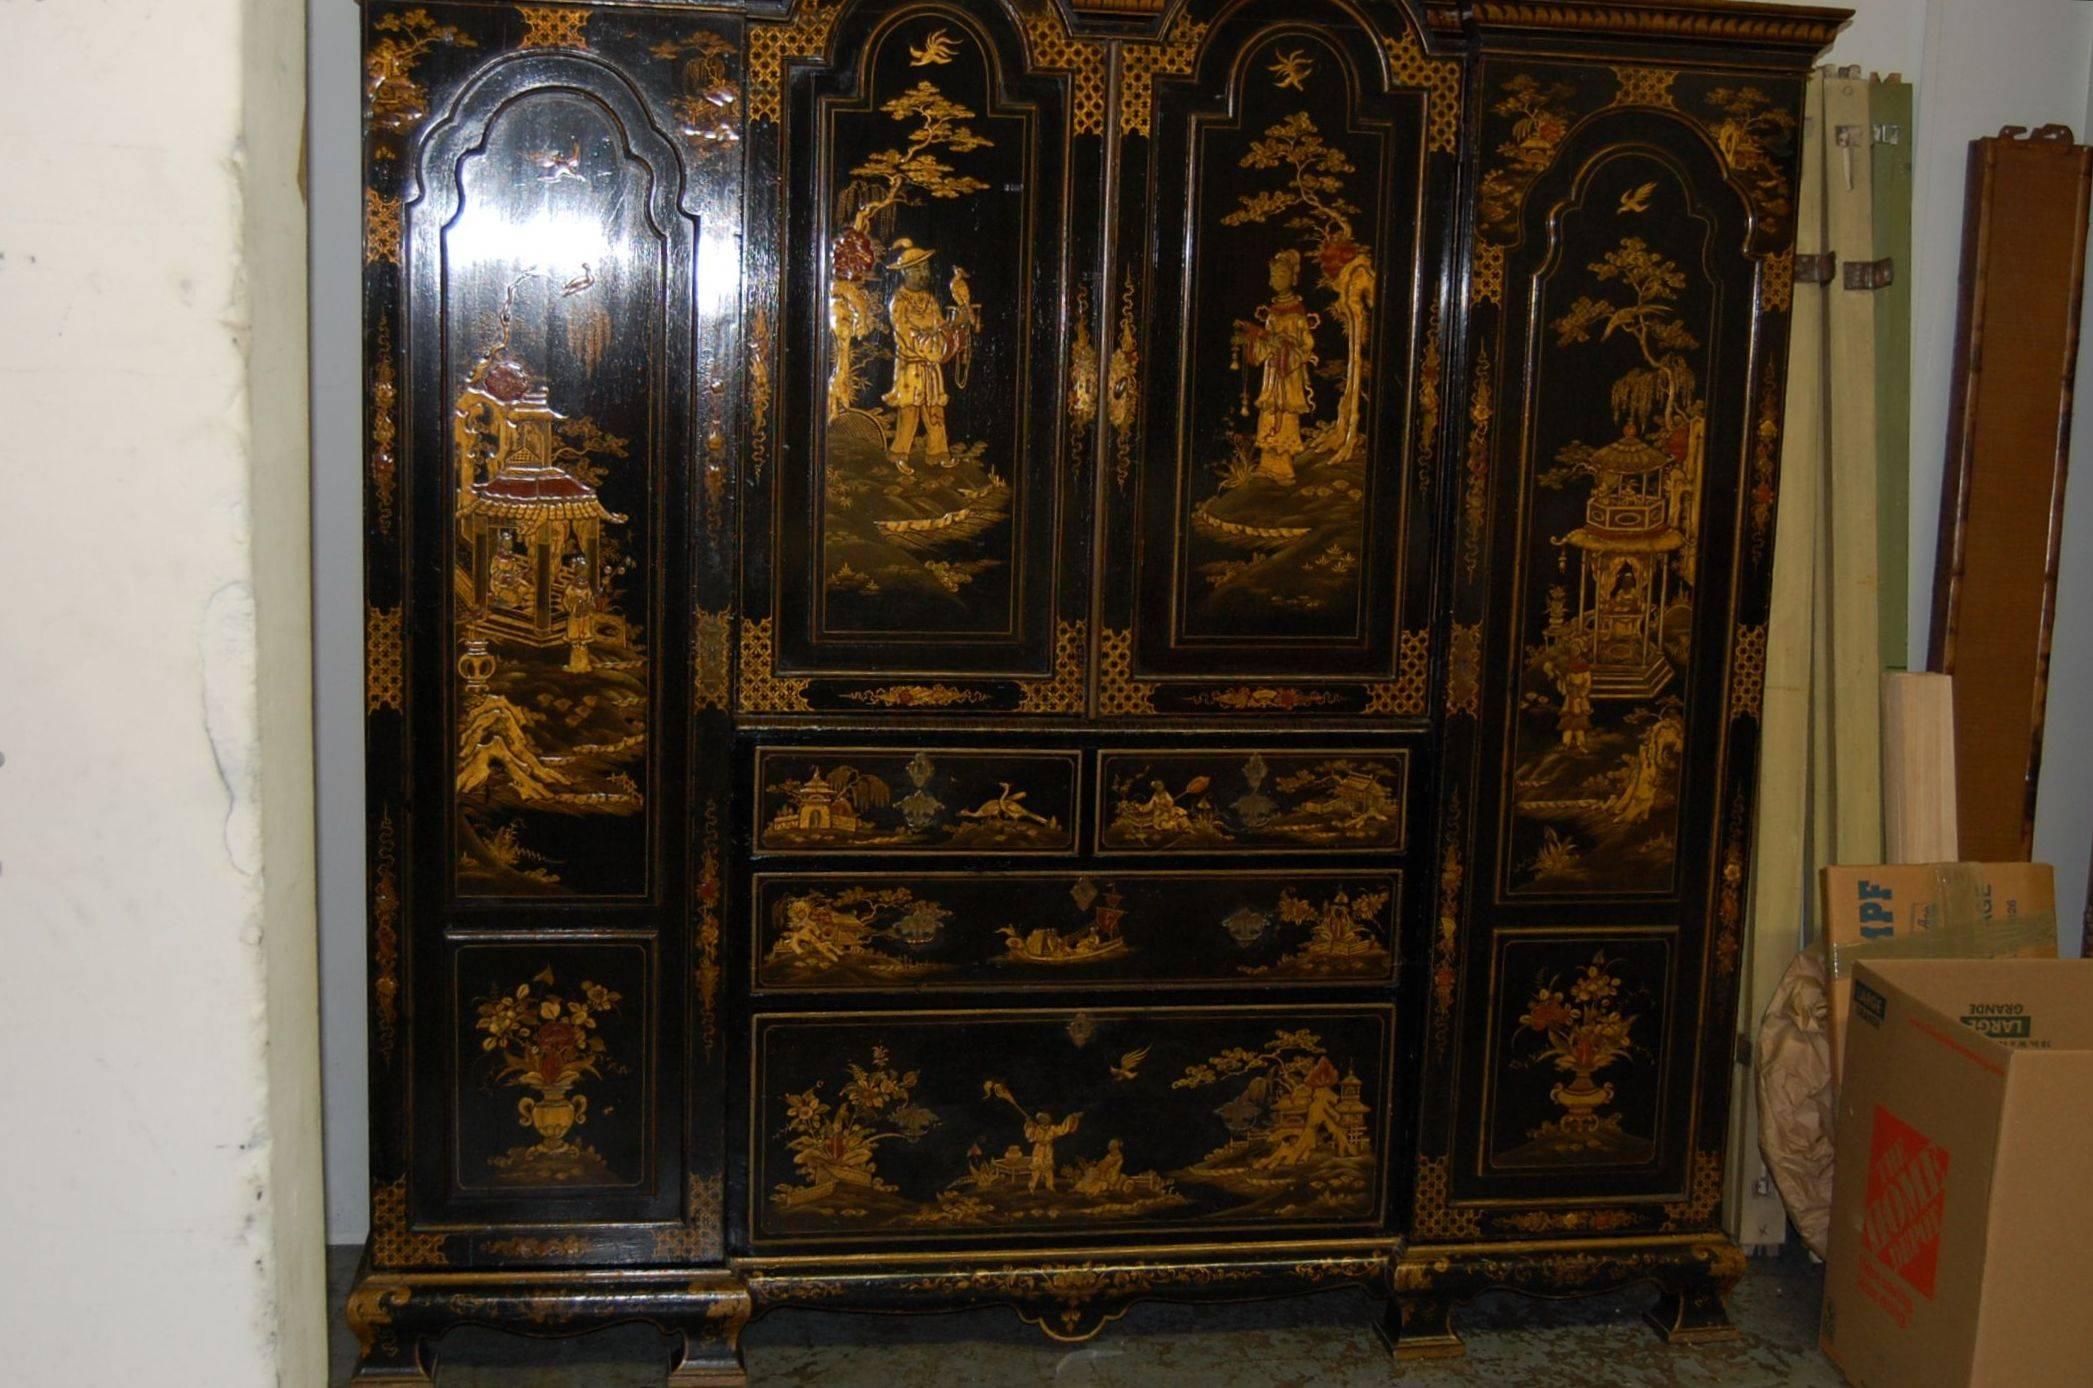 A Japanned wardrobe cabinet with original Chinoiserie decoration, two long cabinets, and a pair of center arched doors above a bank of four drawers. English, decorated in Chinoiserie landscape panels with raised gold lacquer detail. The end cabinets